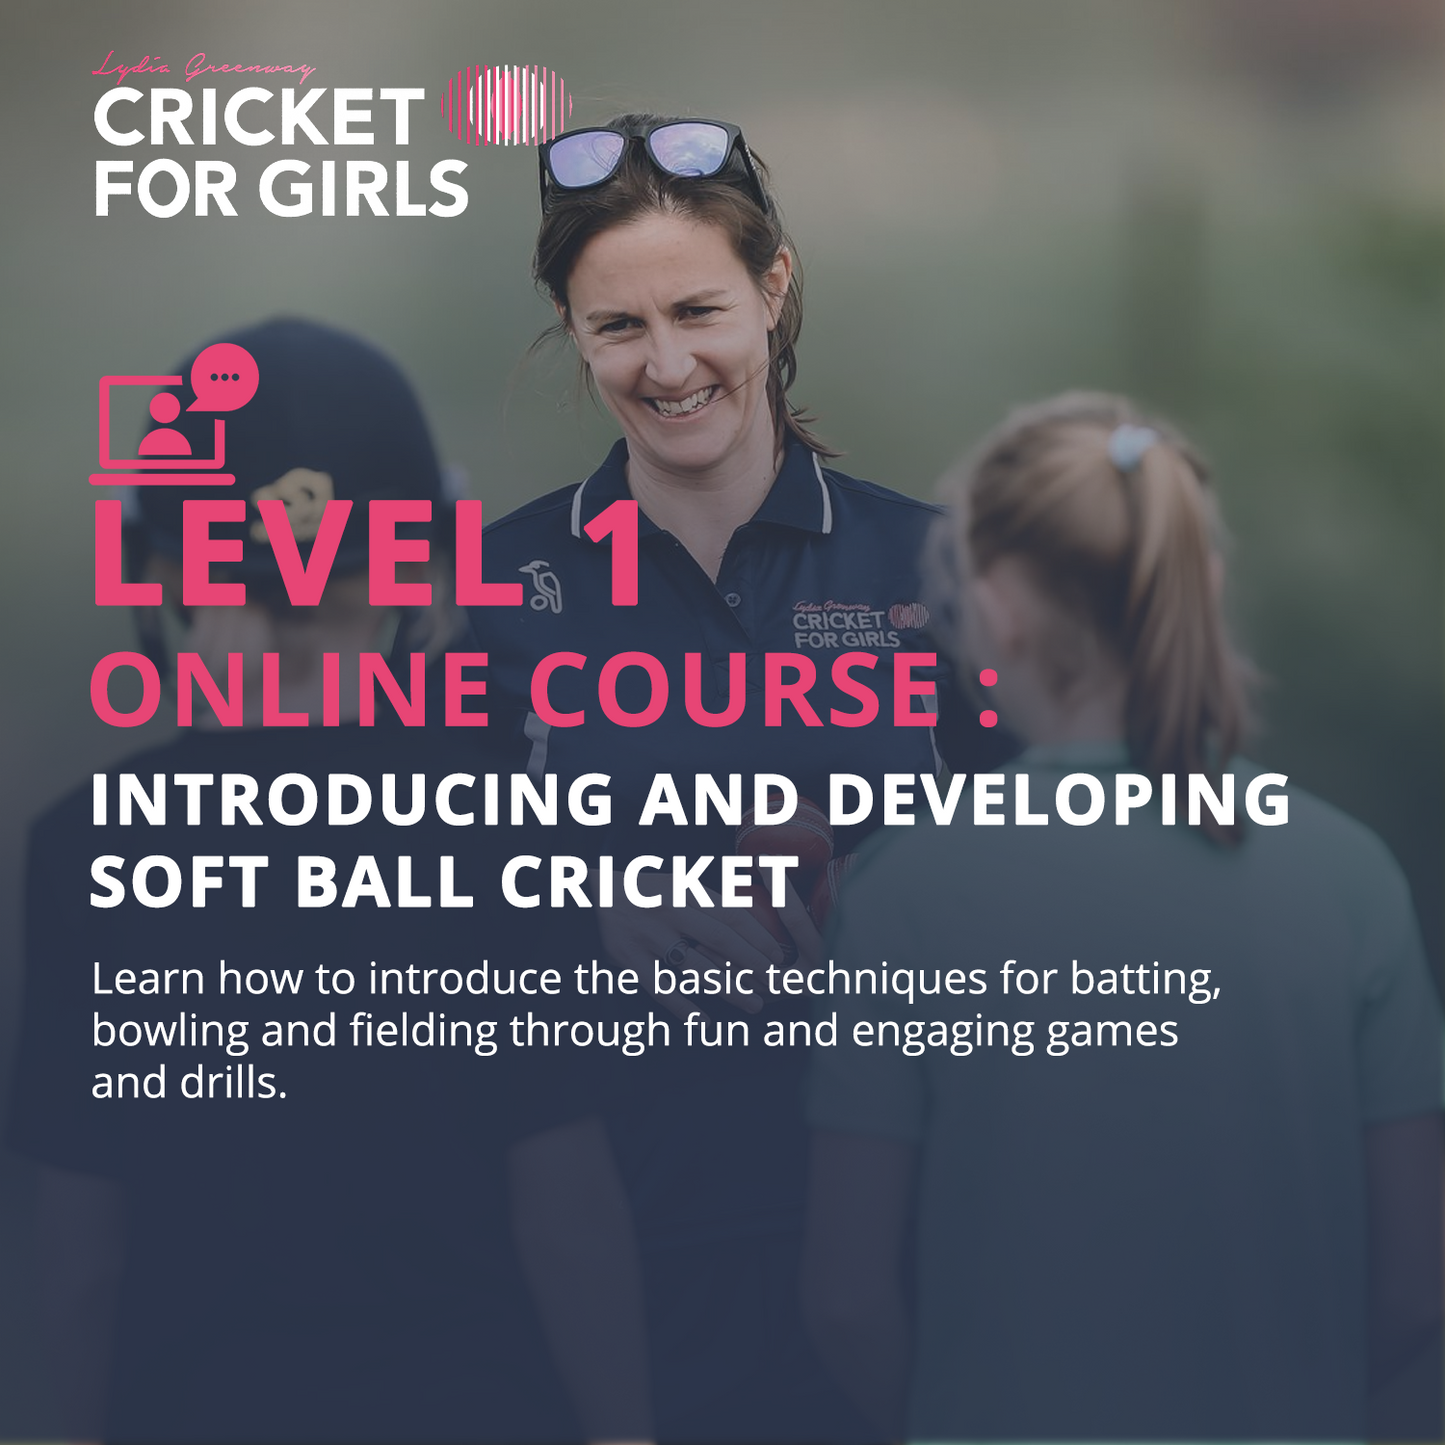 Cricket for Girls Level 1 and Level 2 Preview